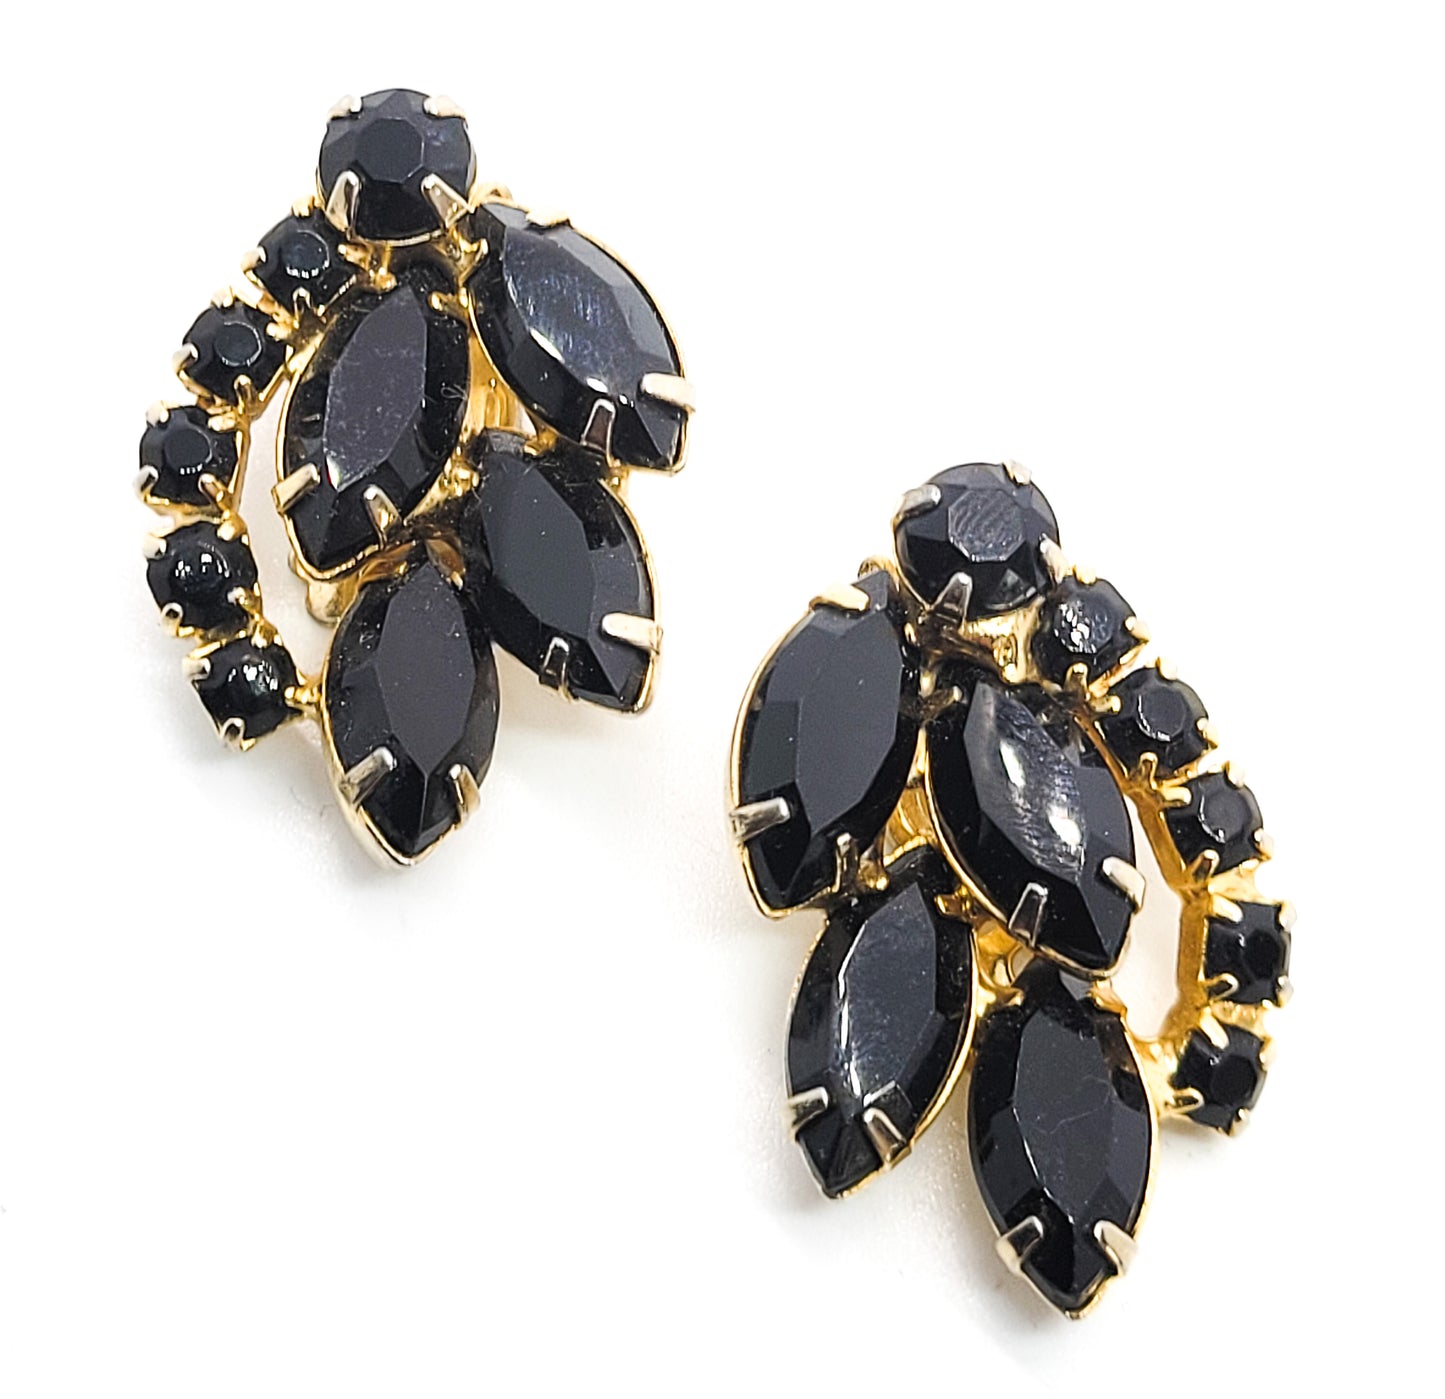 Black and gold prong set vintage Navette cut rhinestone clip on earrings